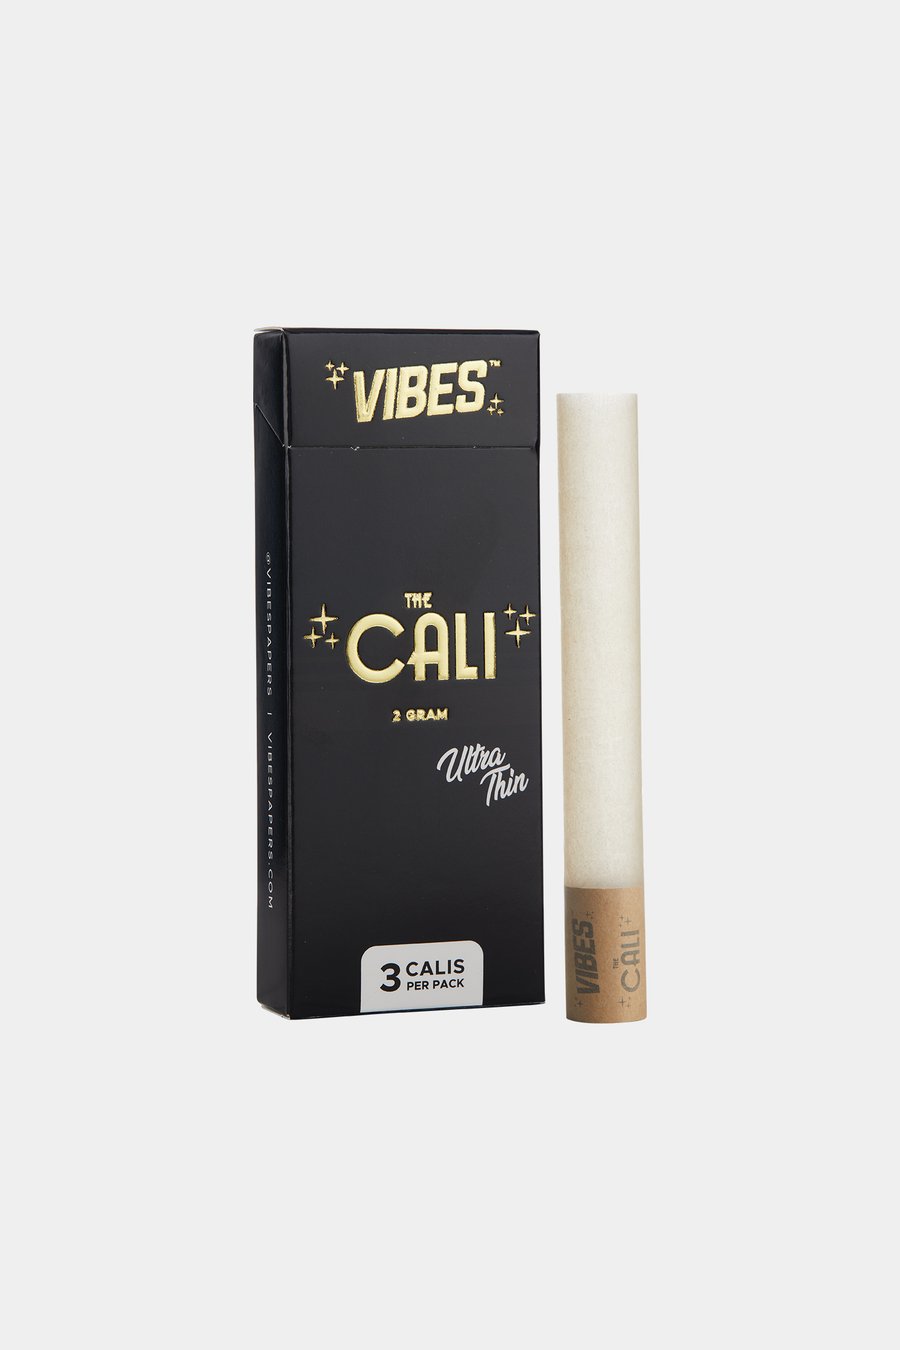 The Cali by VIBES™ 2 Gram